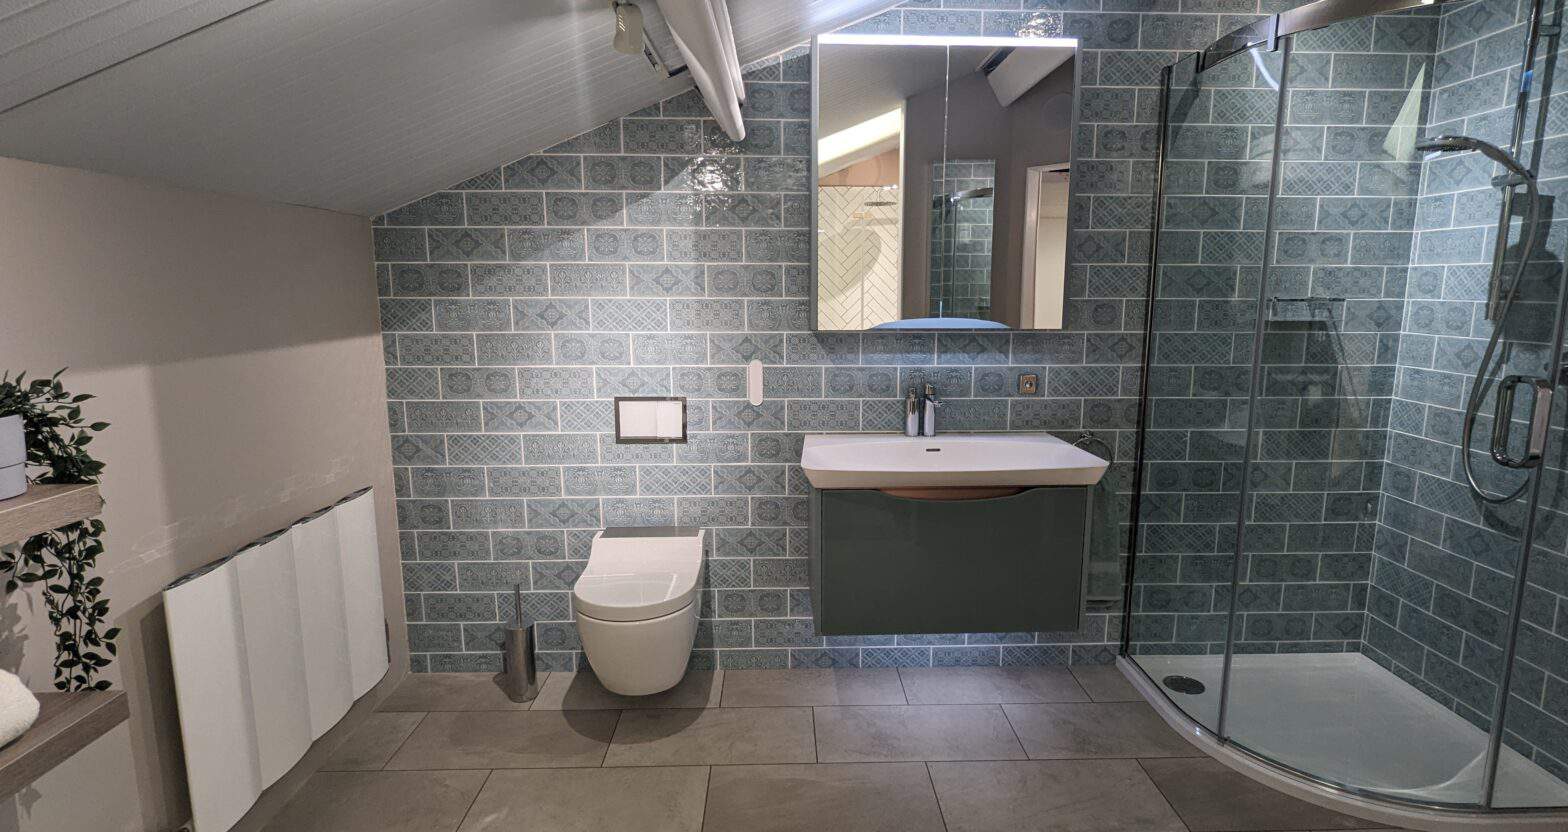 A photo of a bathroom display. Blue textured tiles span across the far wall and wrap into the corner shower enclosure on the right. A complimentary blue wash basin sits in the middle with a mirrored cabinet above and a wall hung toilet on the left with hidden cistern.